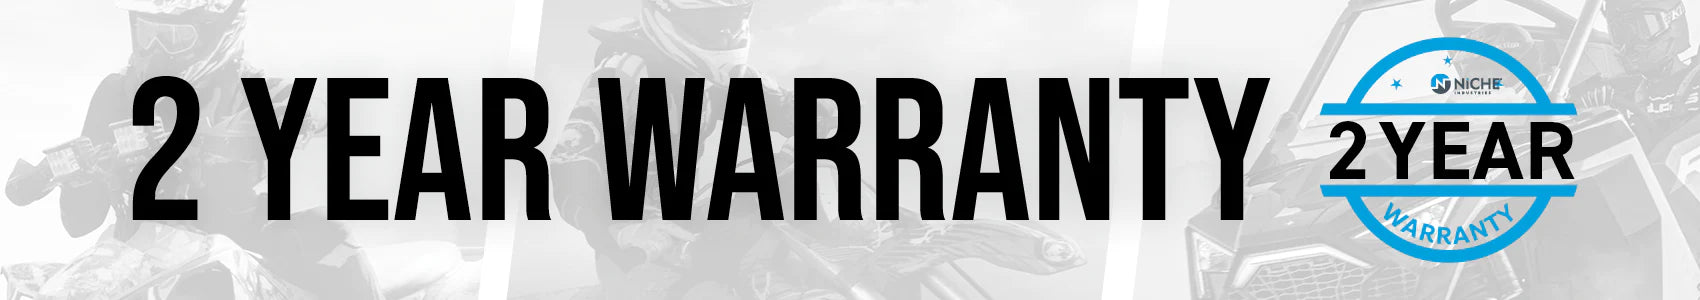 Words 2 Year Warranty over grey scale image of riders on ATV, side-by-side, and dirt bike